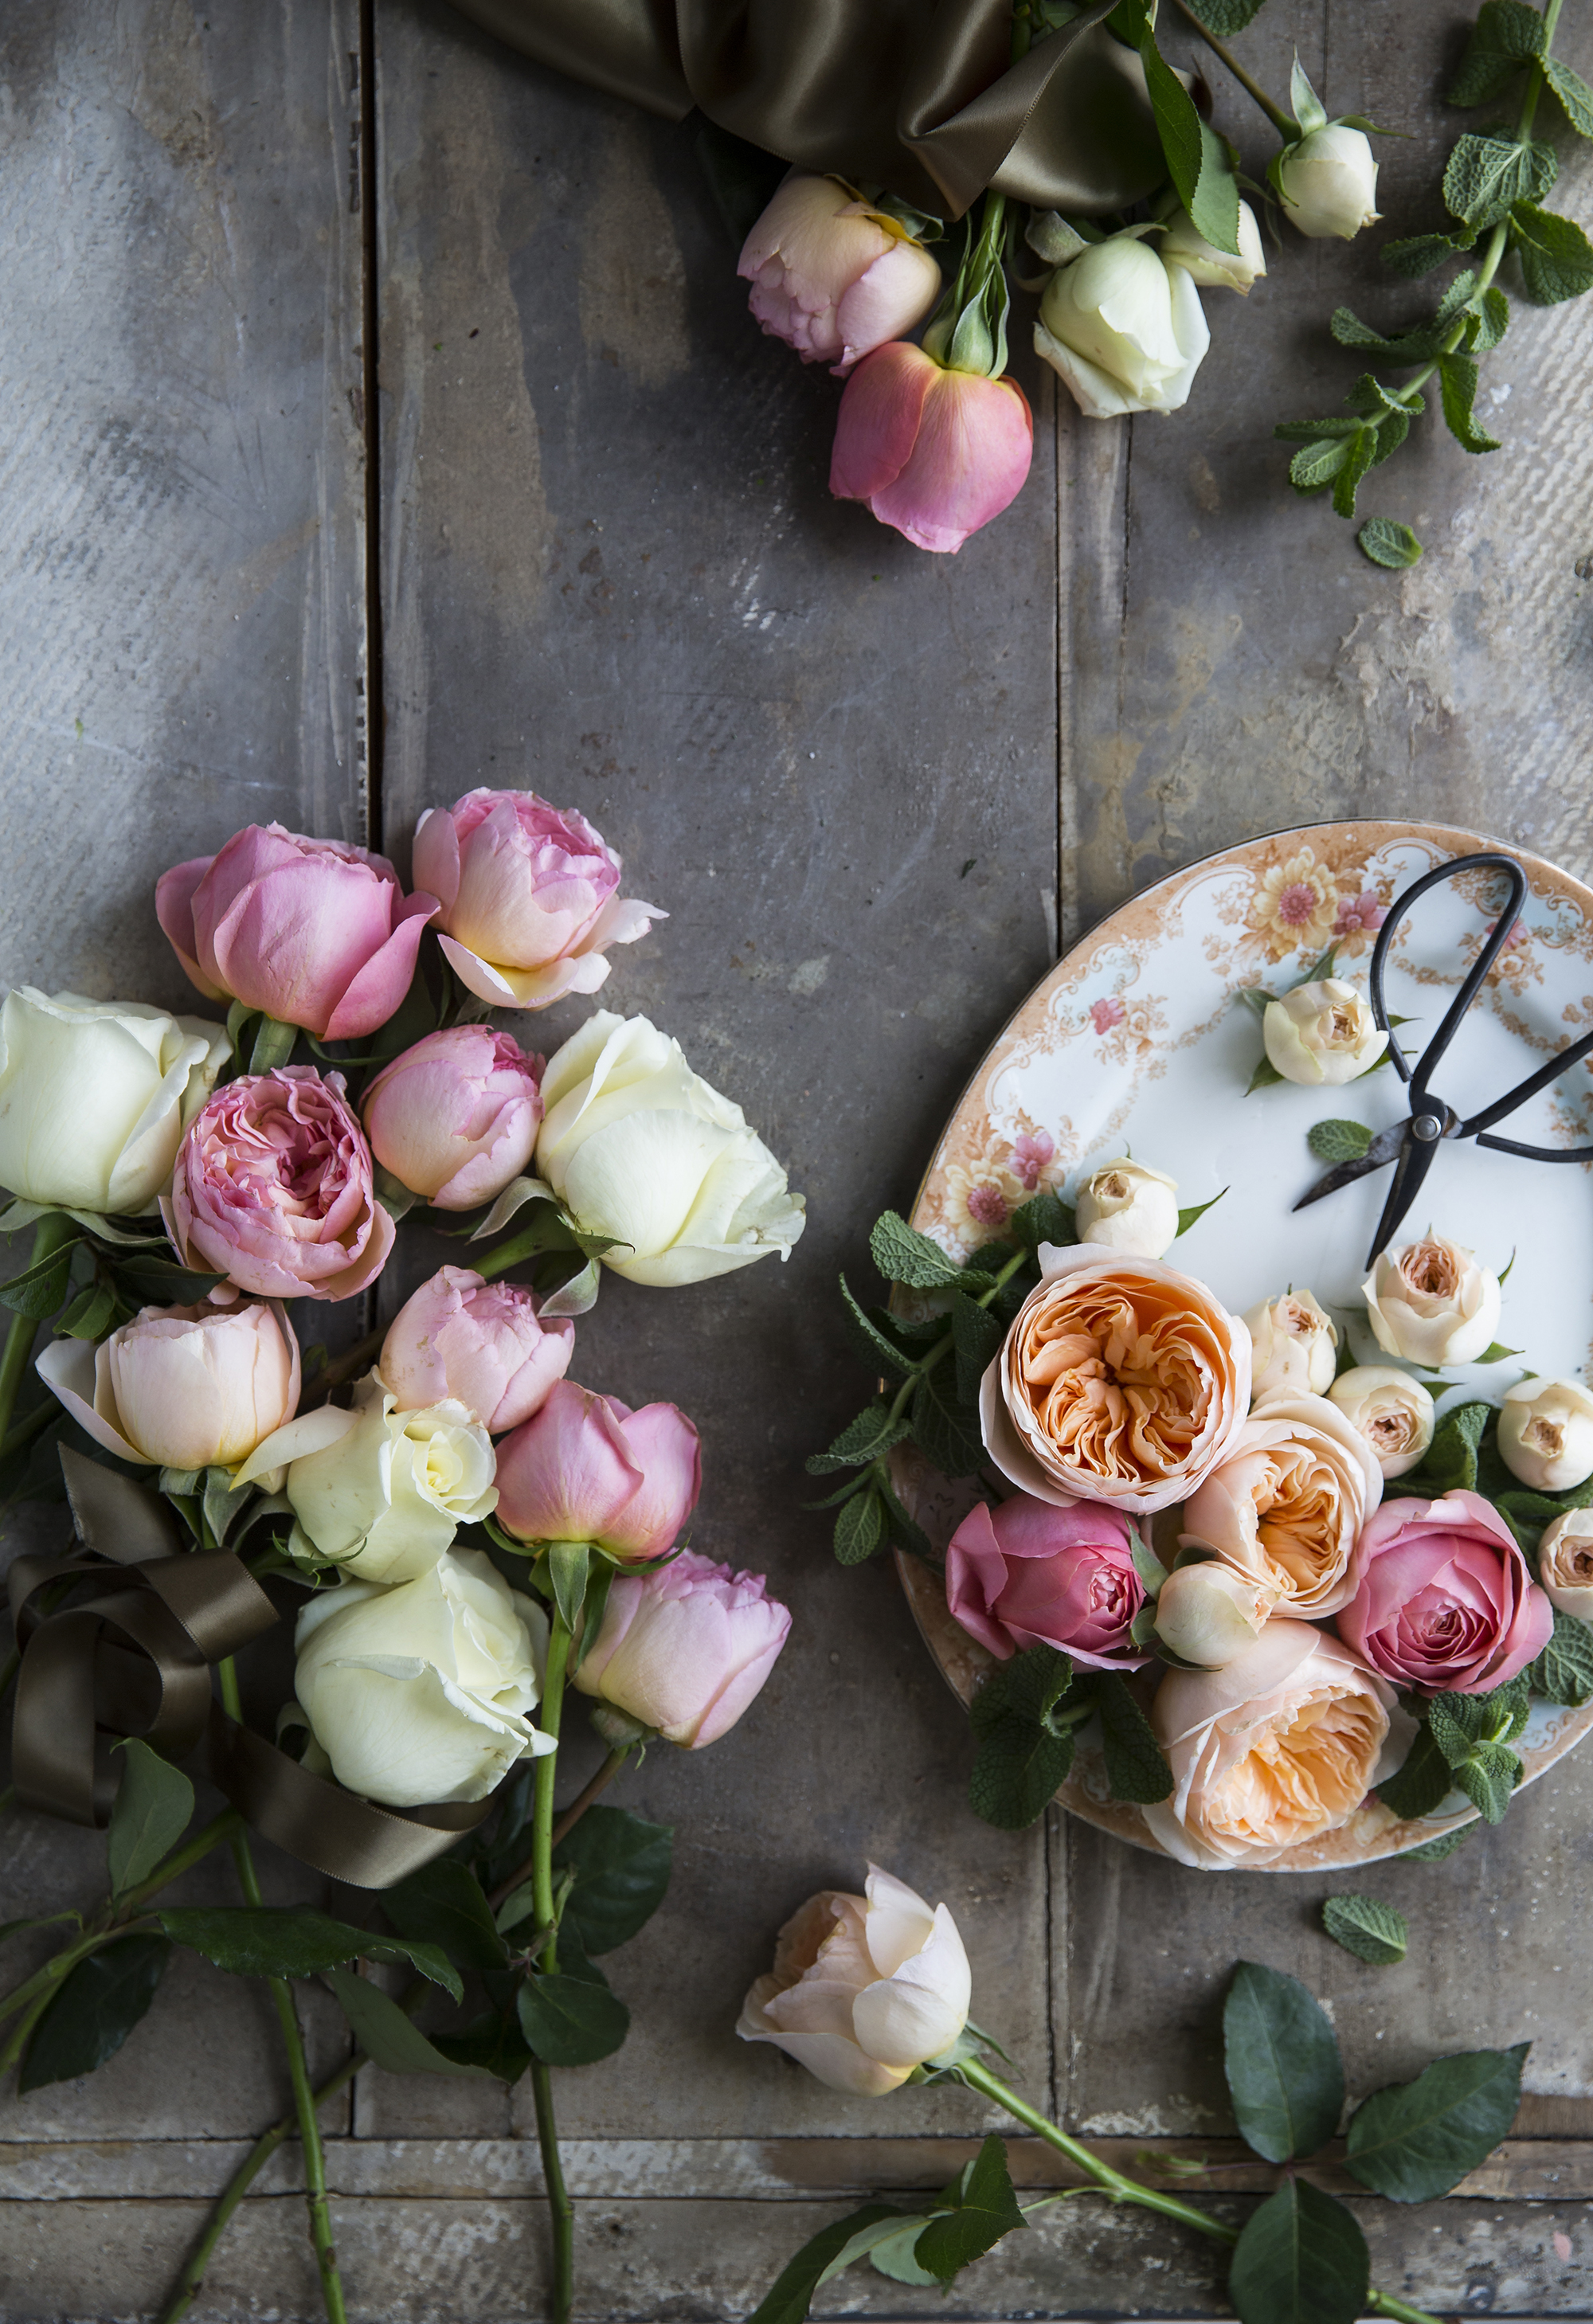 WIN a monthly delivery of flowers from the Real Flower Company